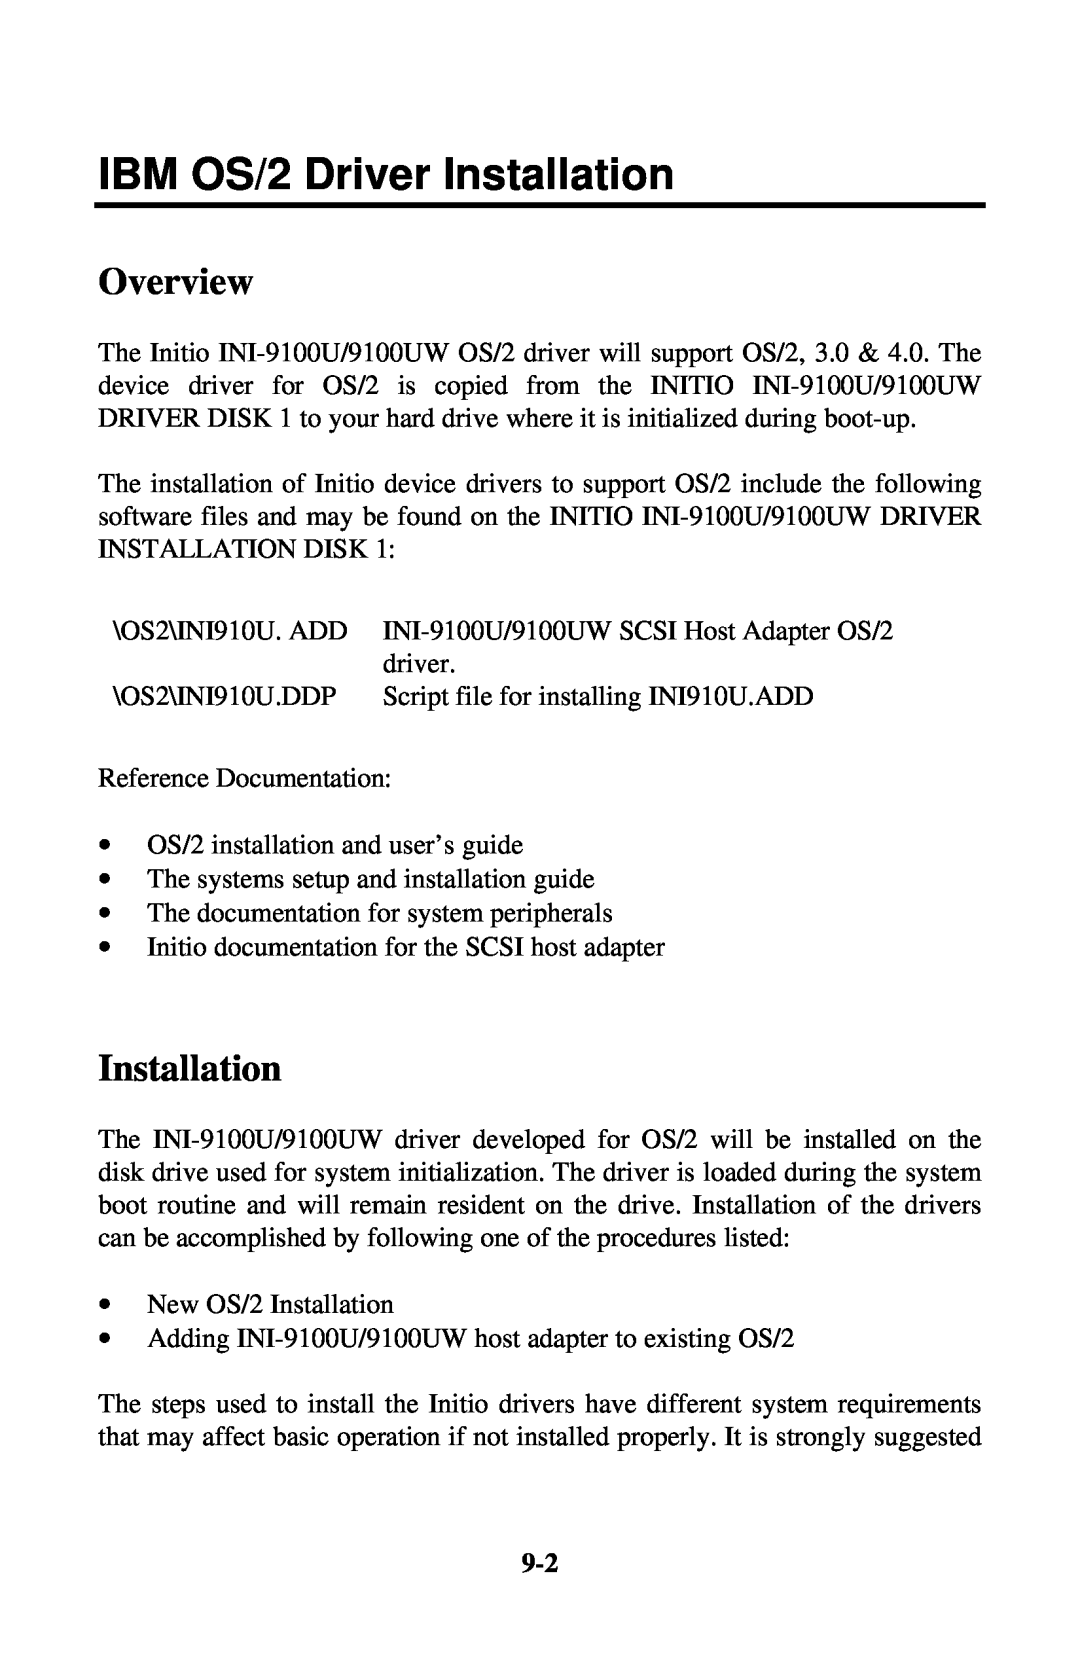 Initio INI-9100UW user manual IBM OS/2 Driver Installation, Overview 